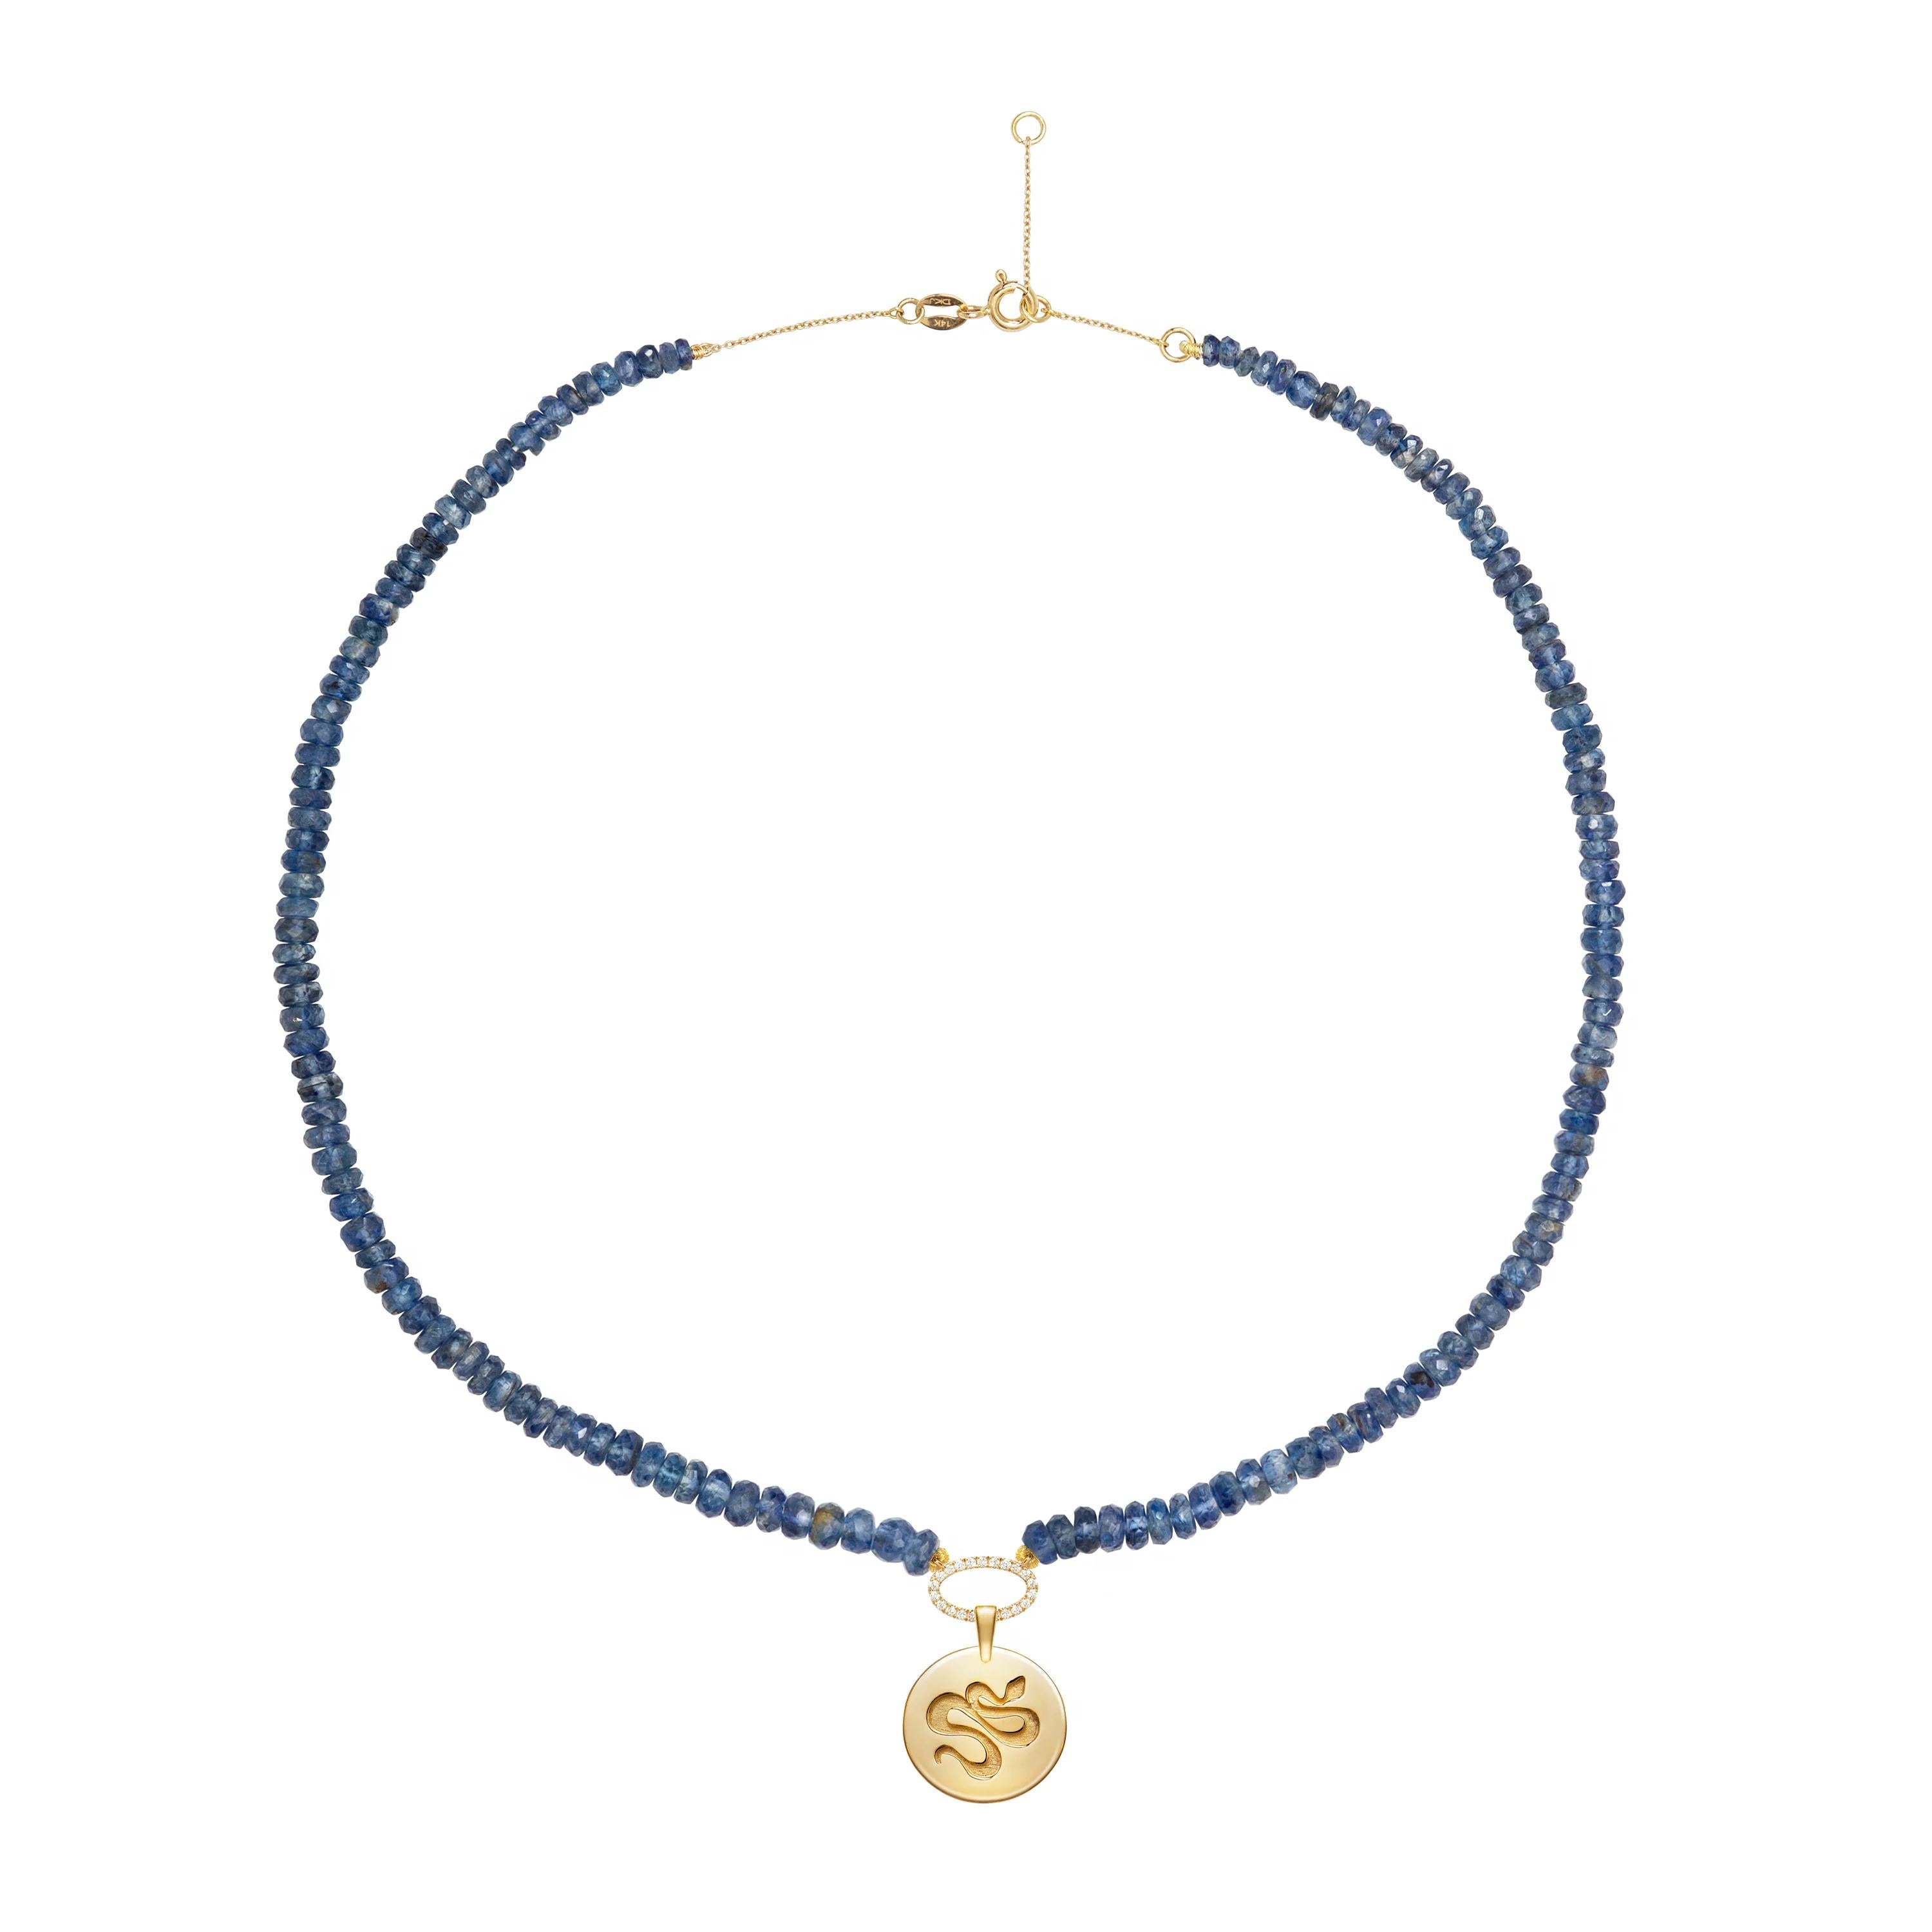 Elevated new hippie collection with semi precious stones. 

14k yellow gold coin snake kyanite beads.